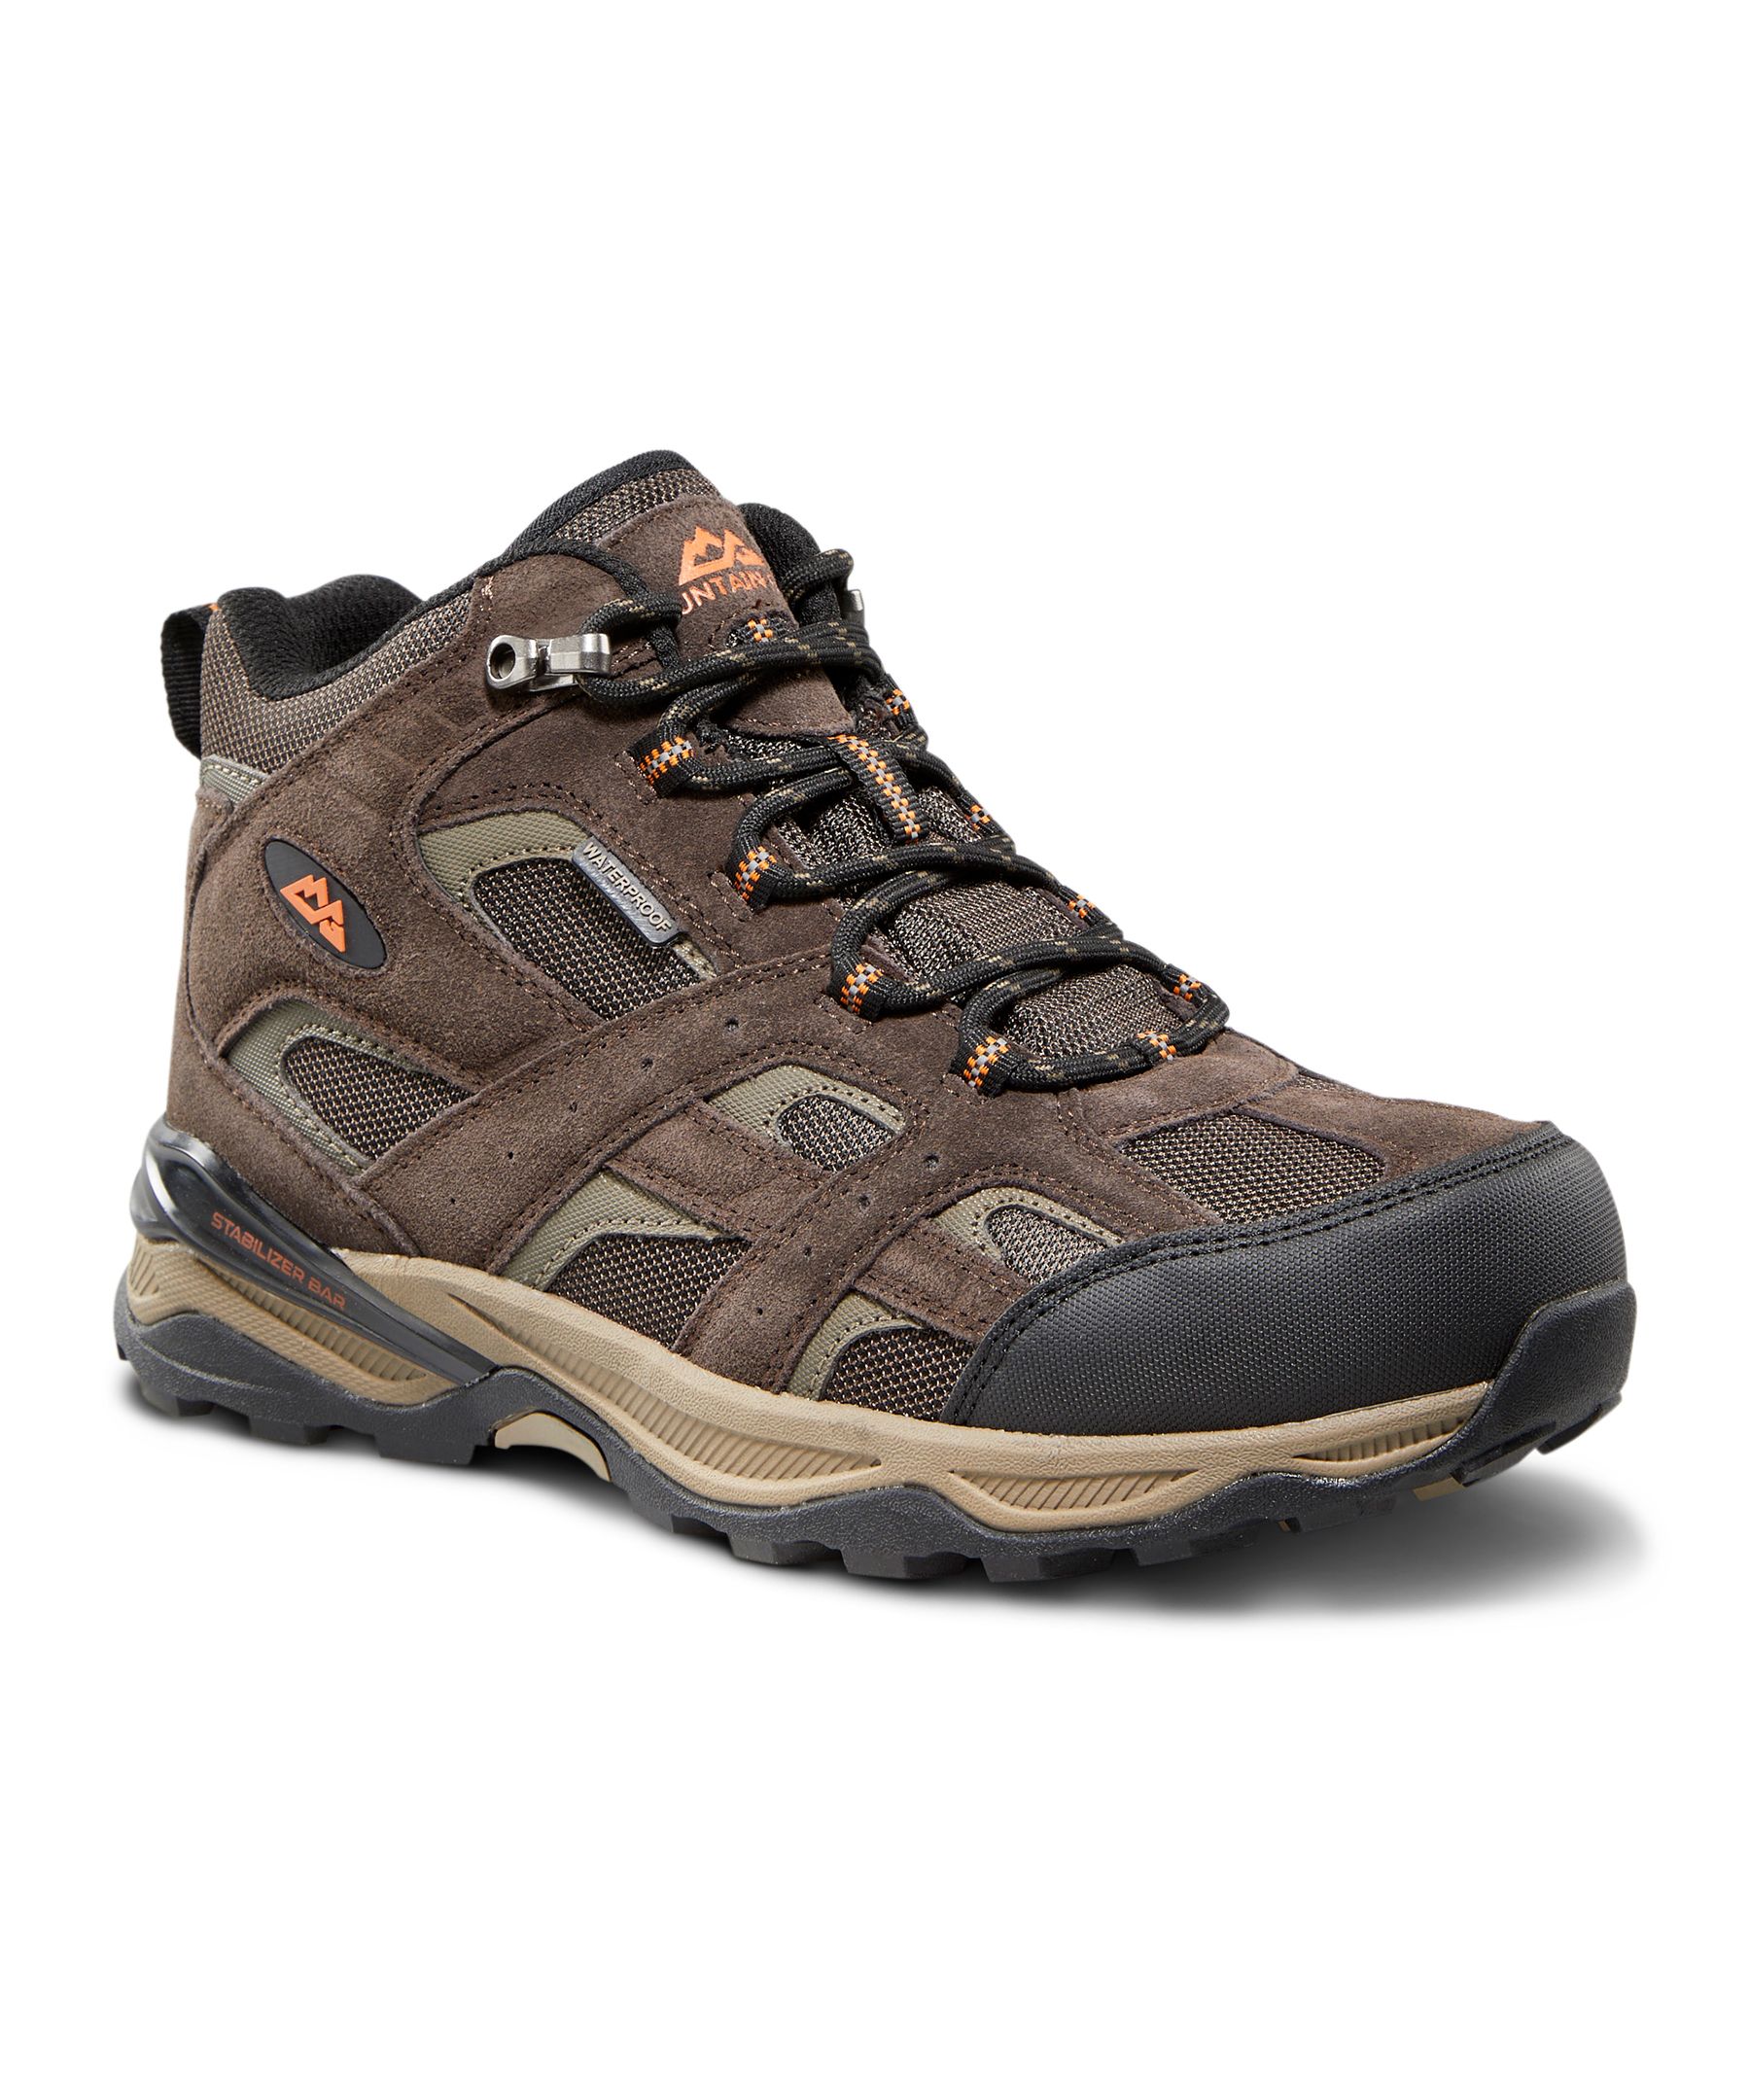 Mountain Gear Men's Ascent Waterproof Hiking Boots - Brown | Marks